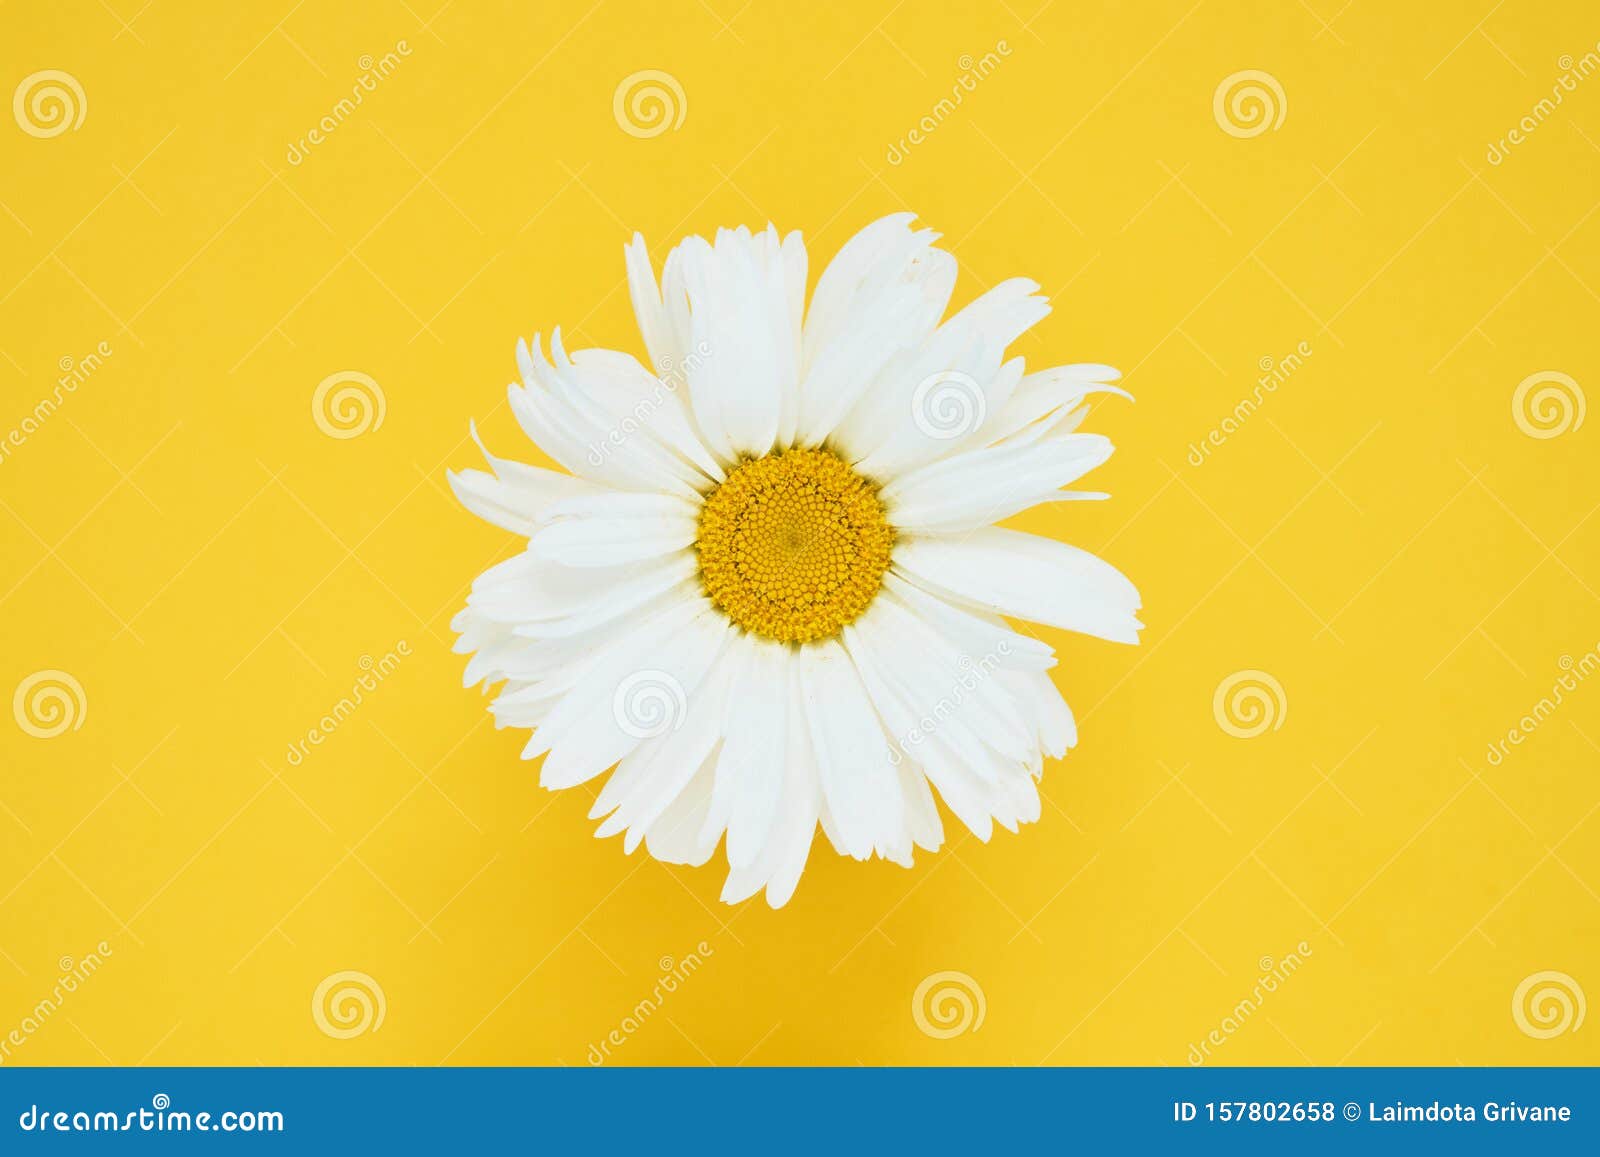 White Daisy Flower on Yellow Background. Copy Space, Top View Stock Photo -  Image of bloom, holiday: 157802658